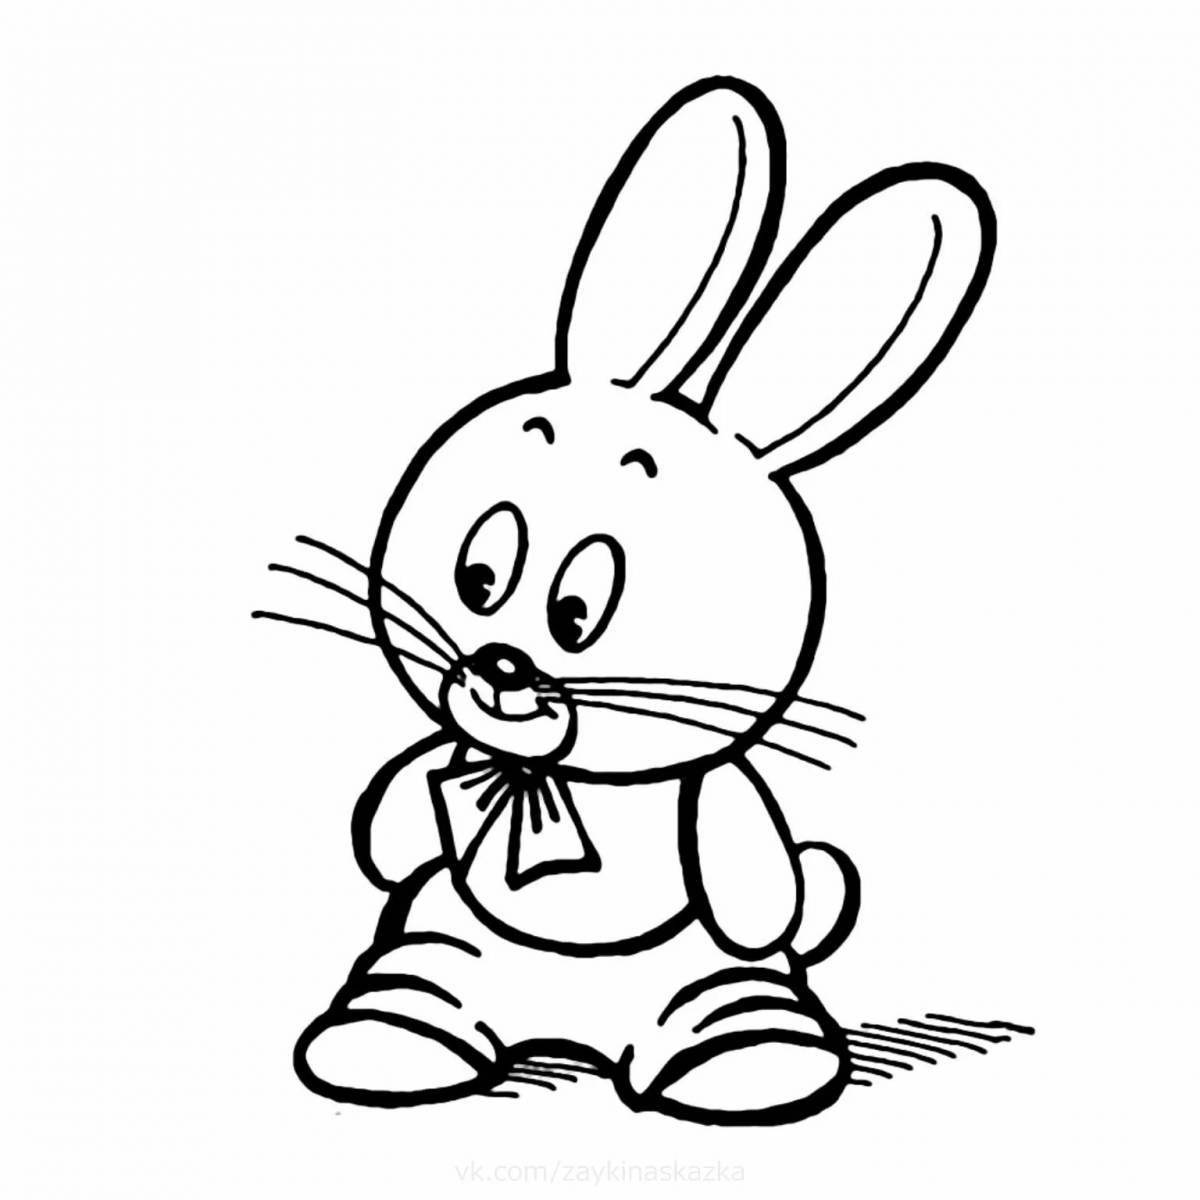 Creative rabbit drawing for kids